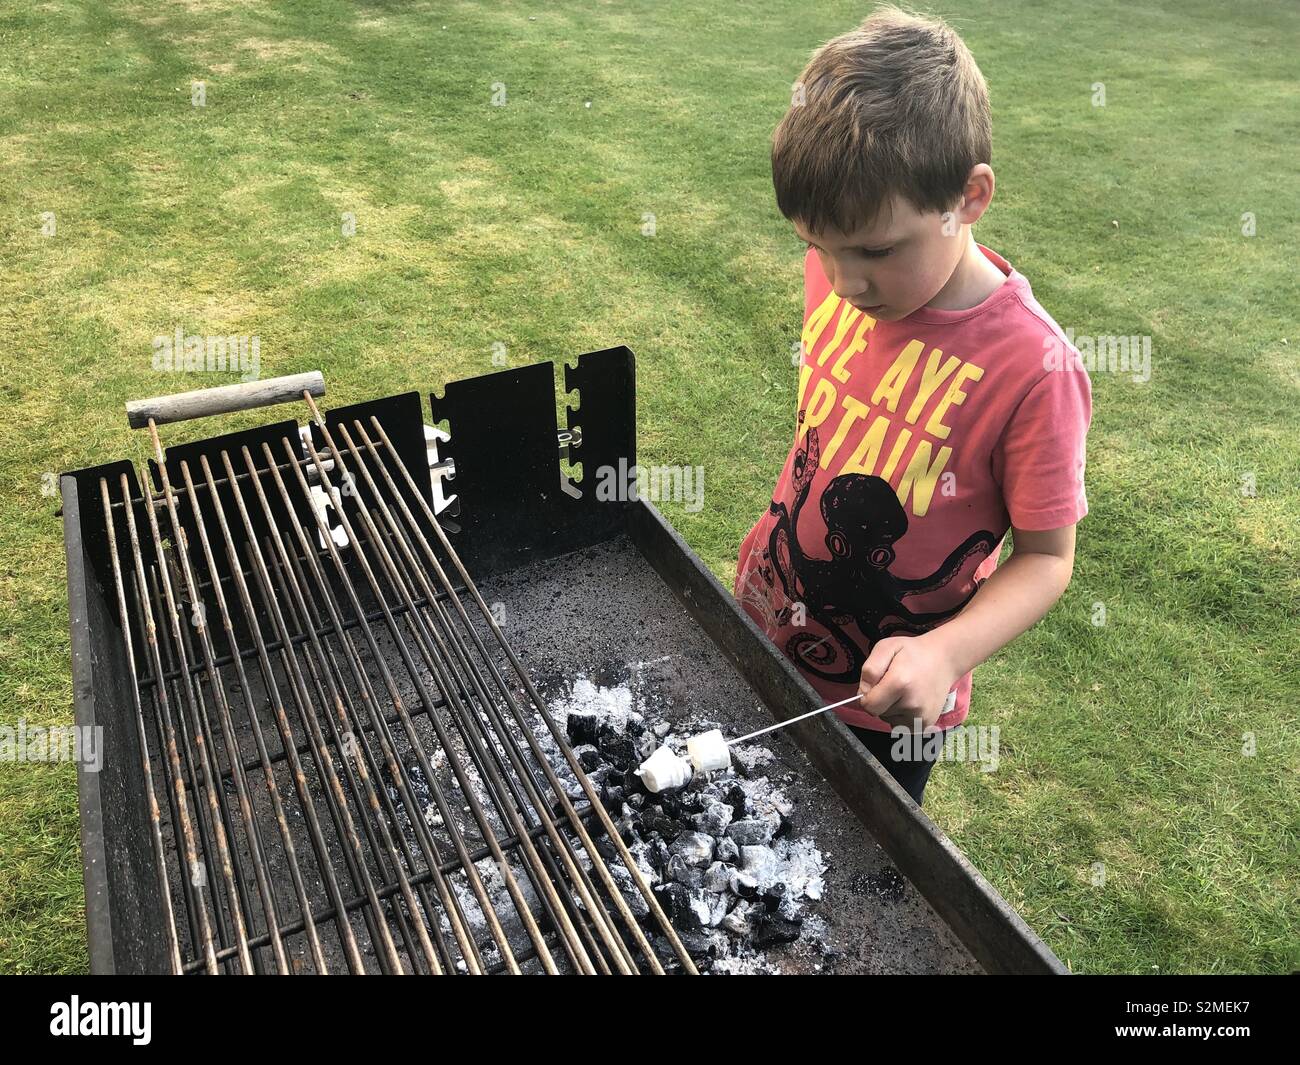 Young boy cooking his marshmallows on a BBQ, UK Stock Photo